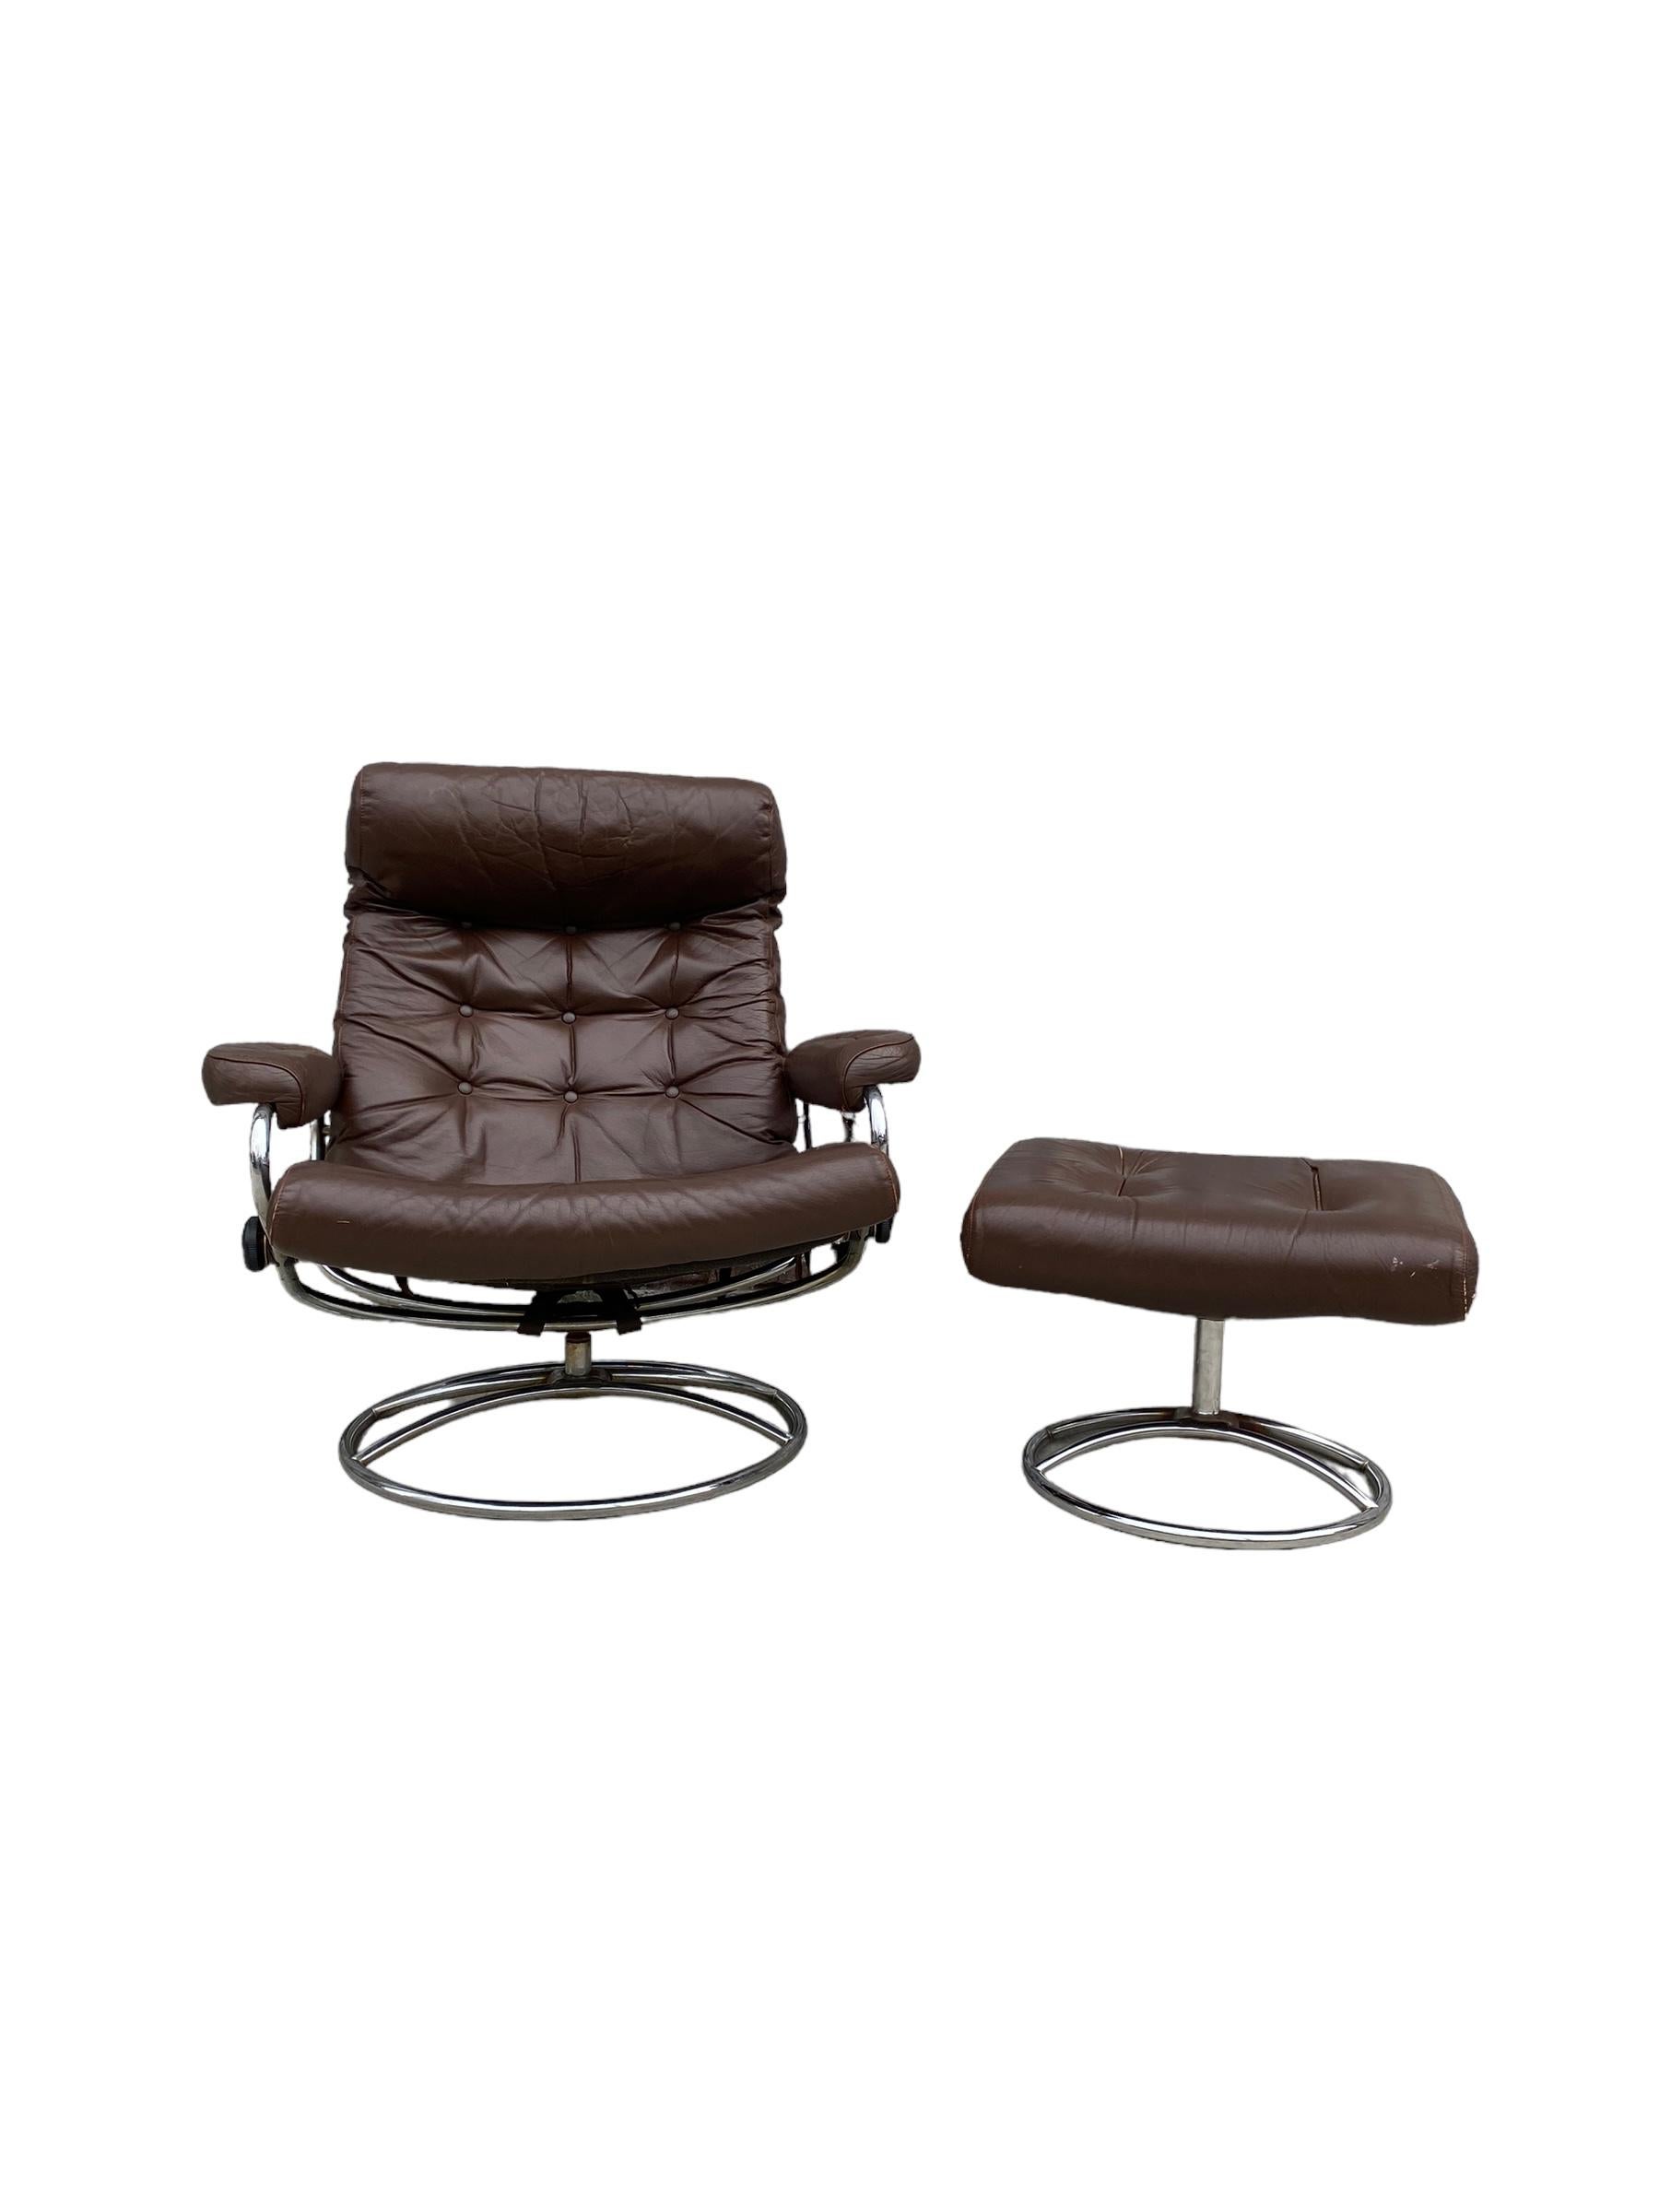 Leather Ekornes Stressless Reclining Lounge Chair and Ottoman For Sale